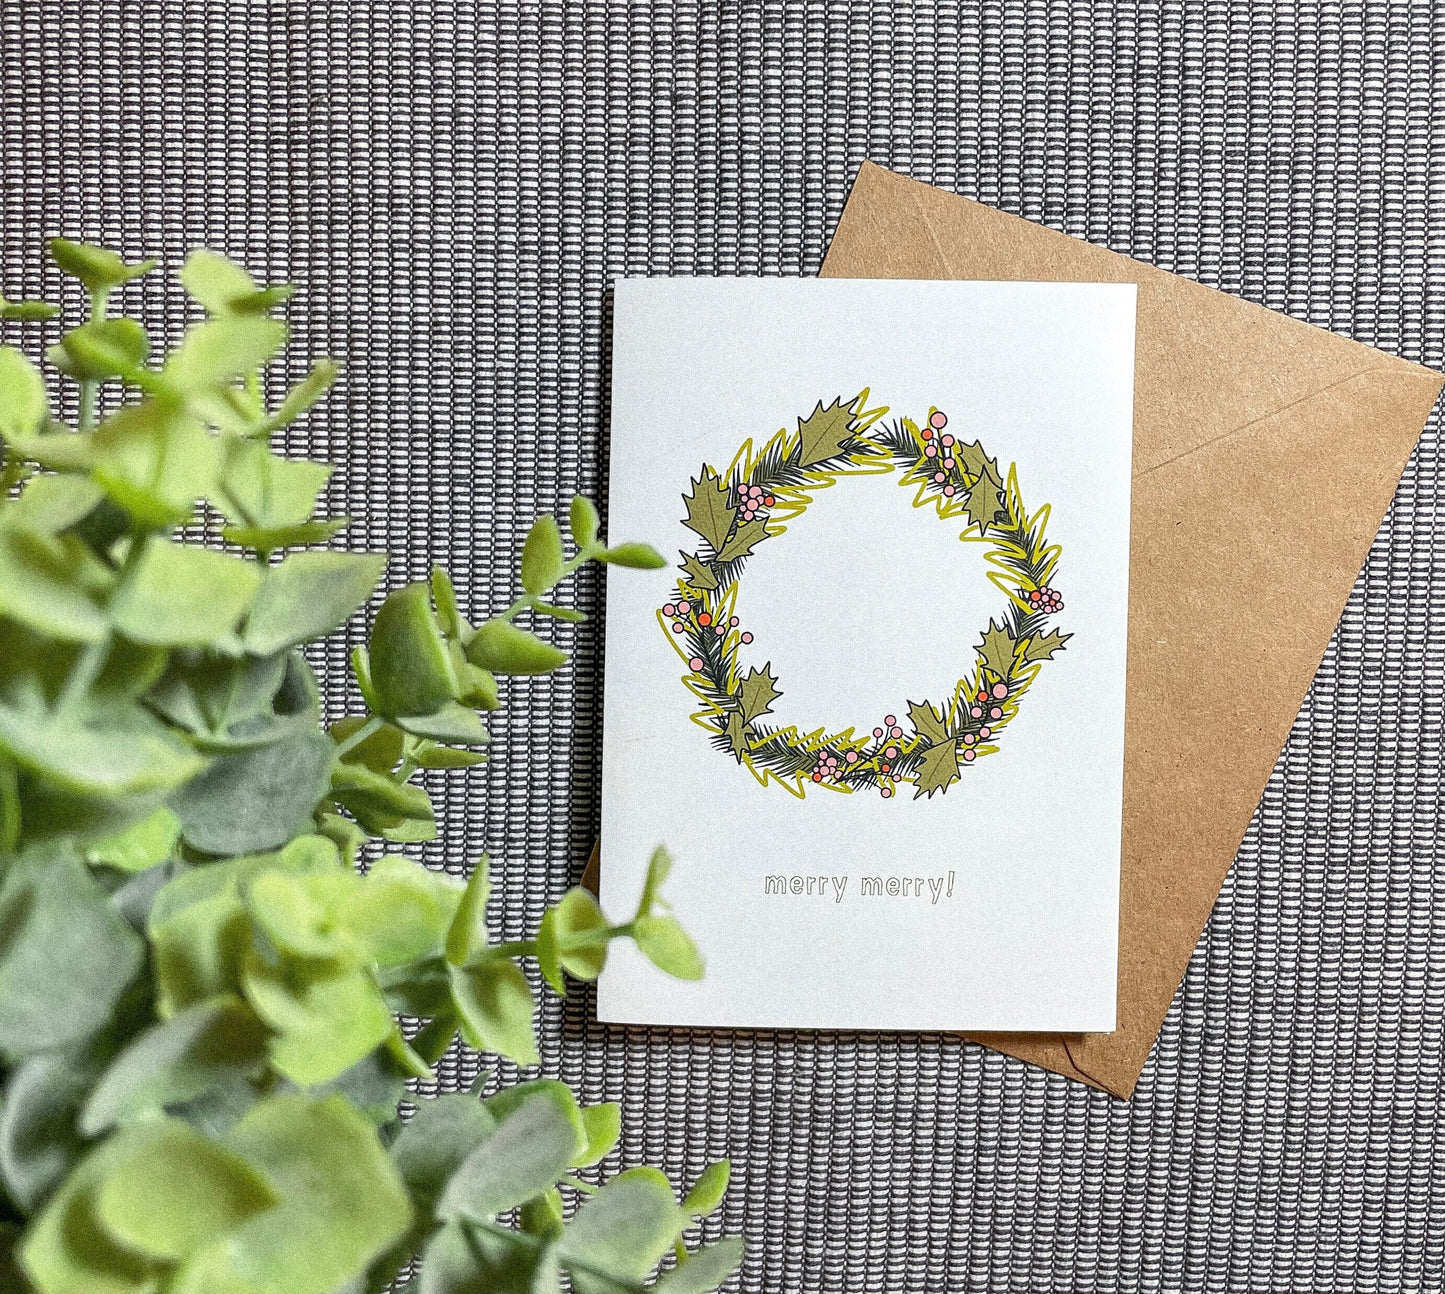 This card features a very merry Christmas wreath with the text 'merry merry!" It's the perfect Christmas card for anyone in your life! 